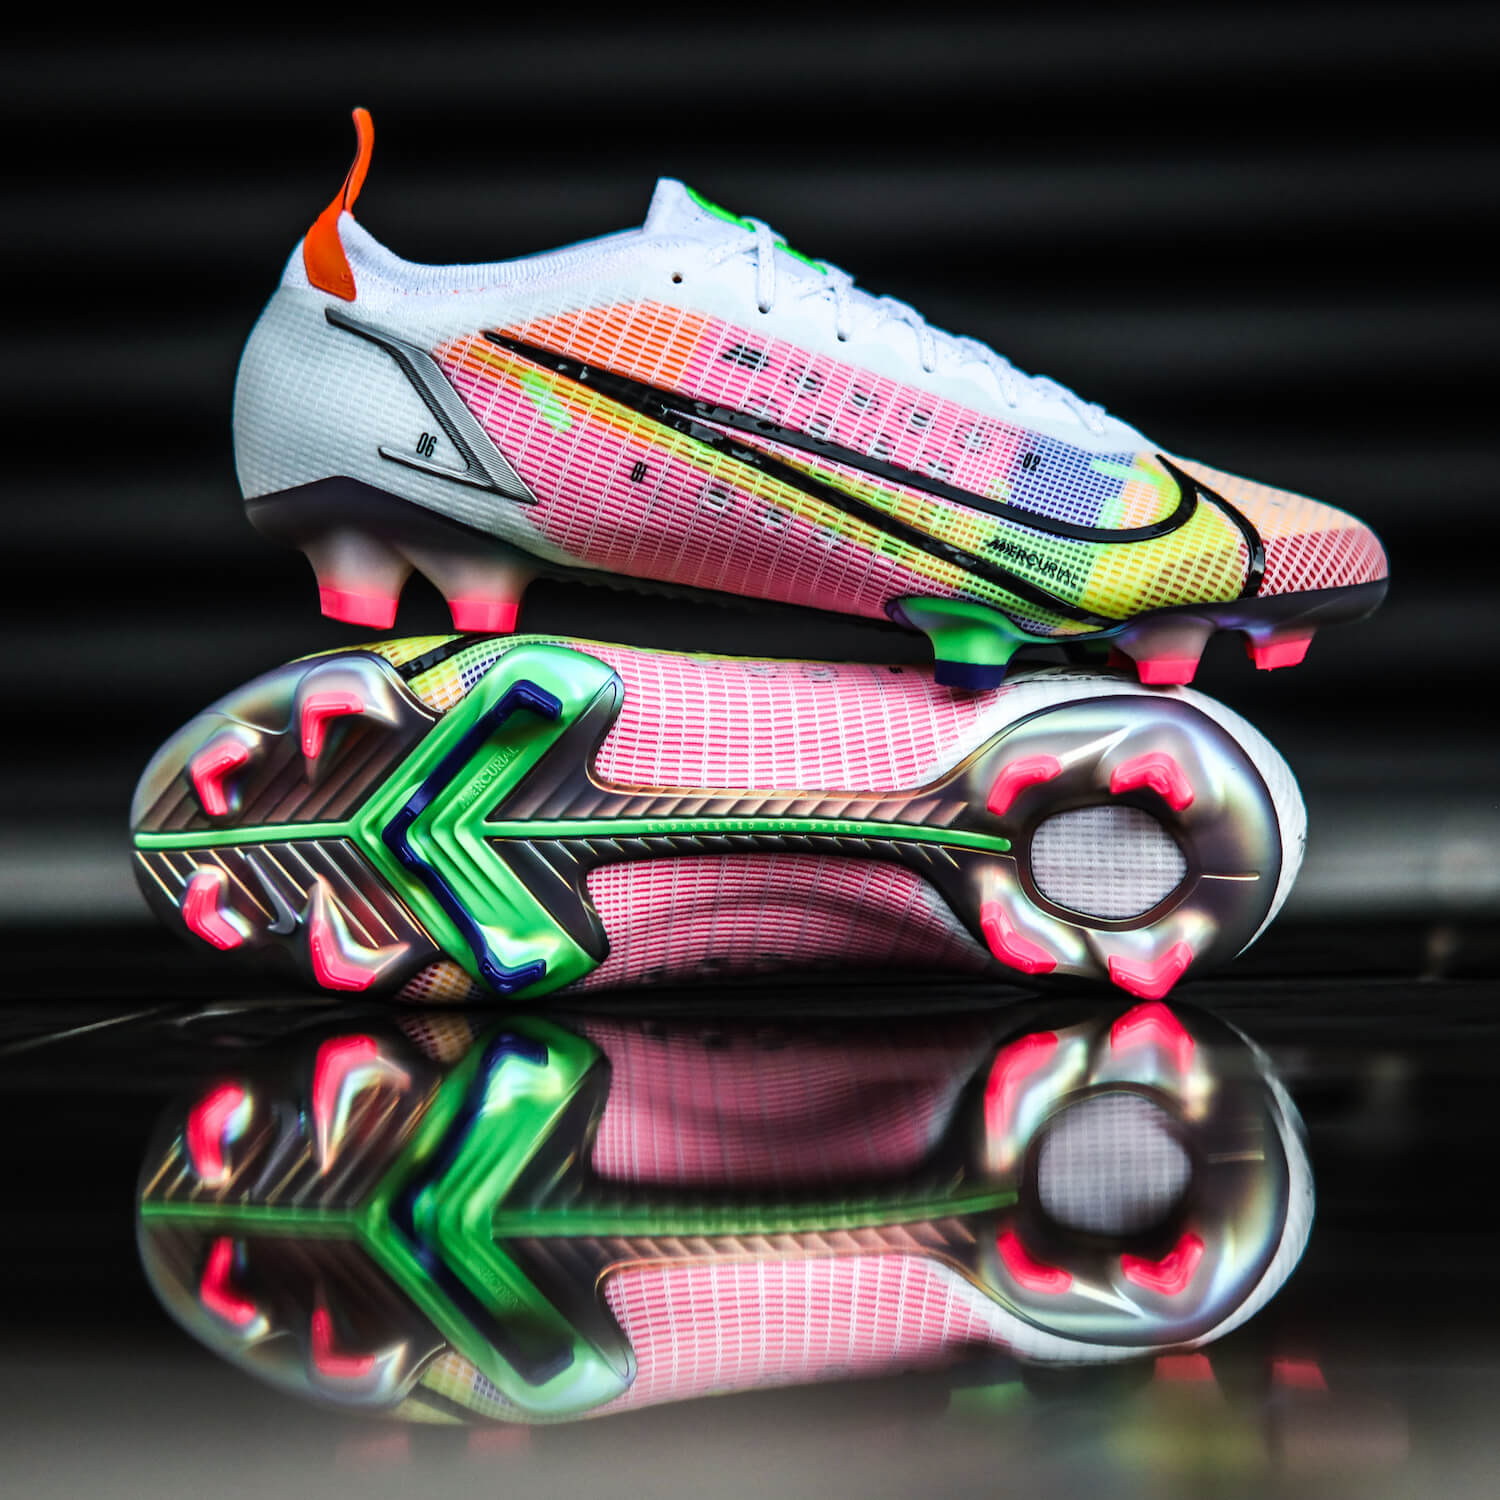 The Complete Nike Mercurial Timeline | Ultra Football